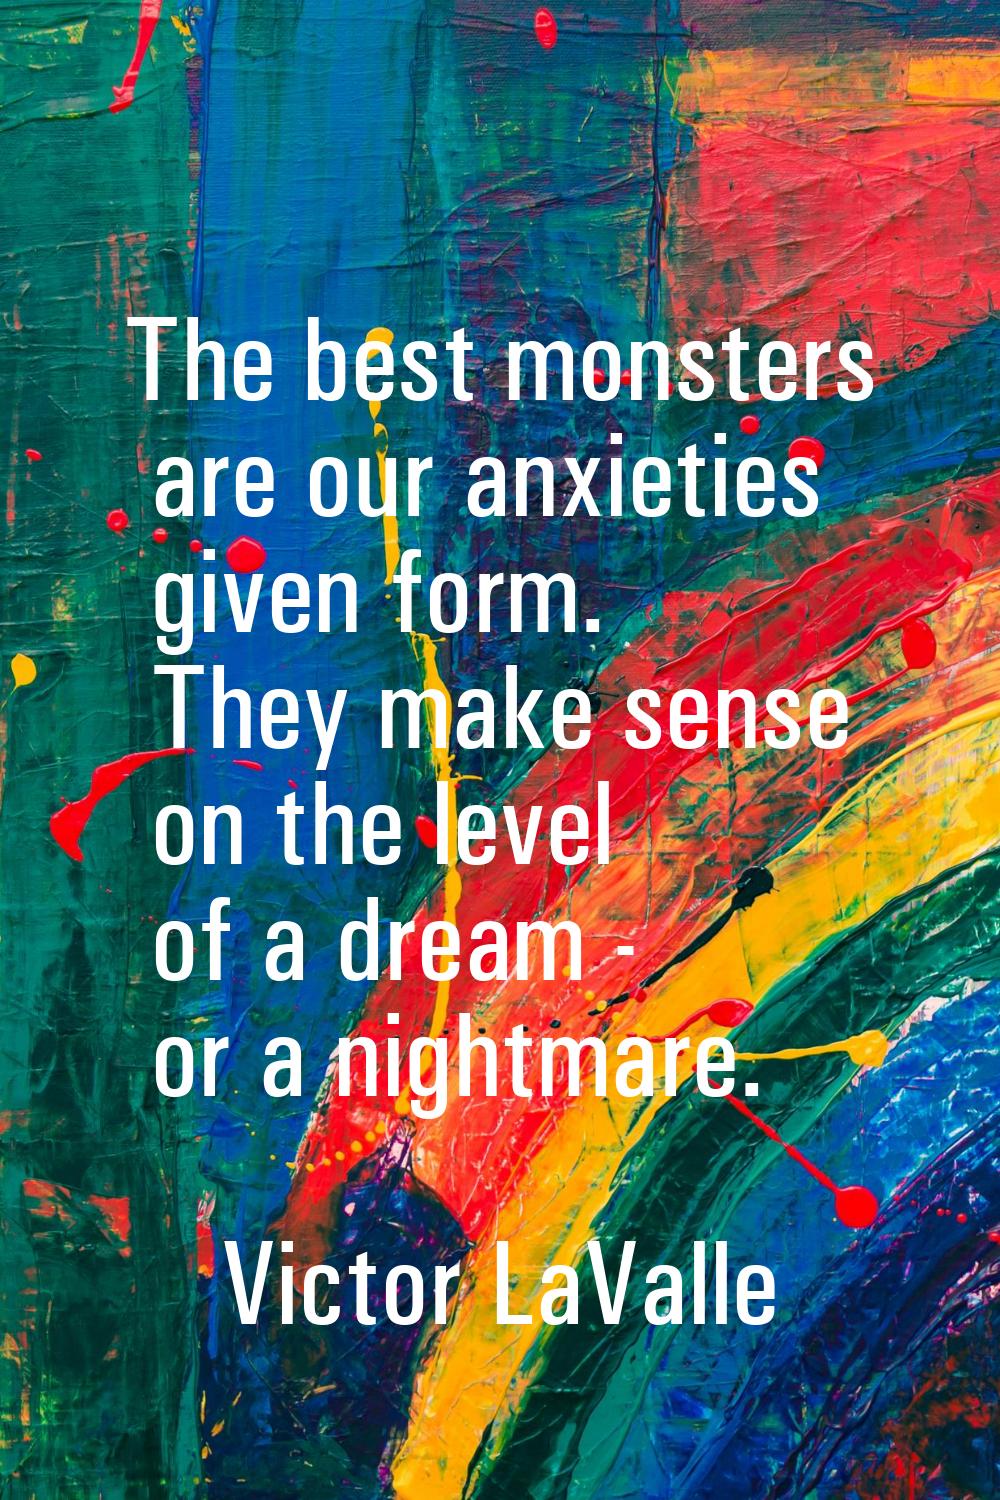 The best monsters are our anxieties given form. They make sense on the level of a dream - or a nigh